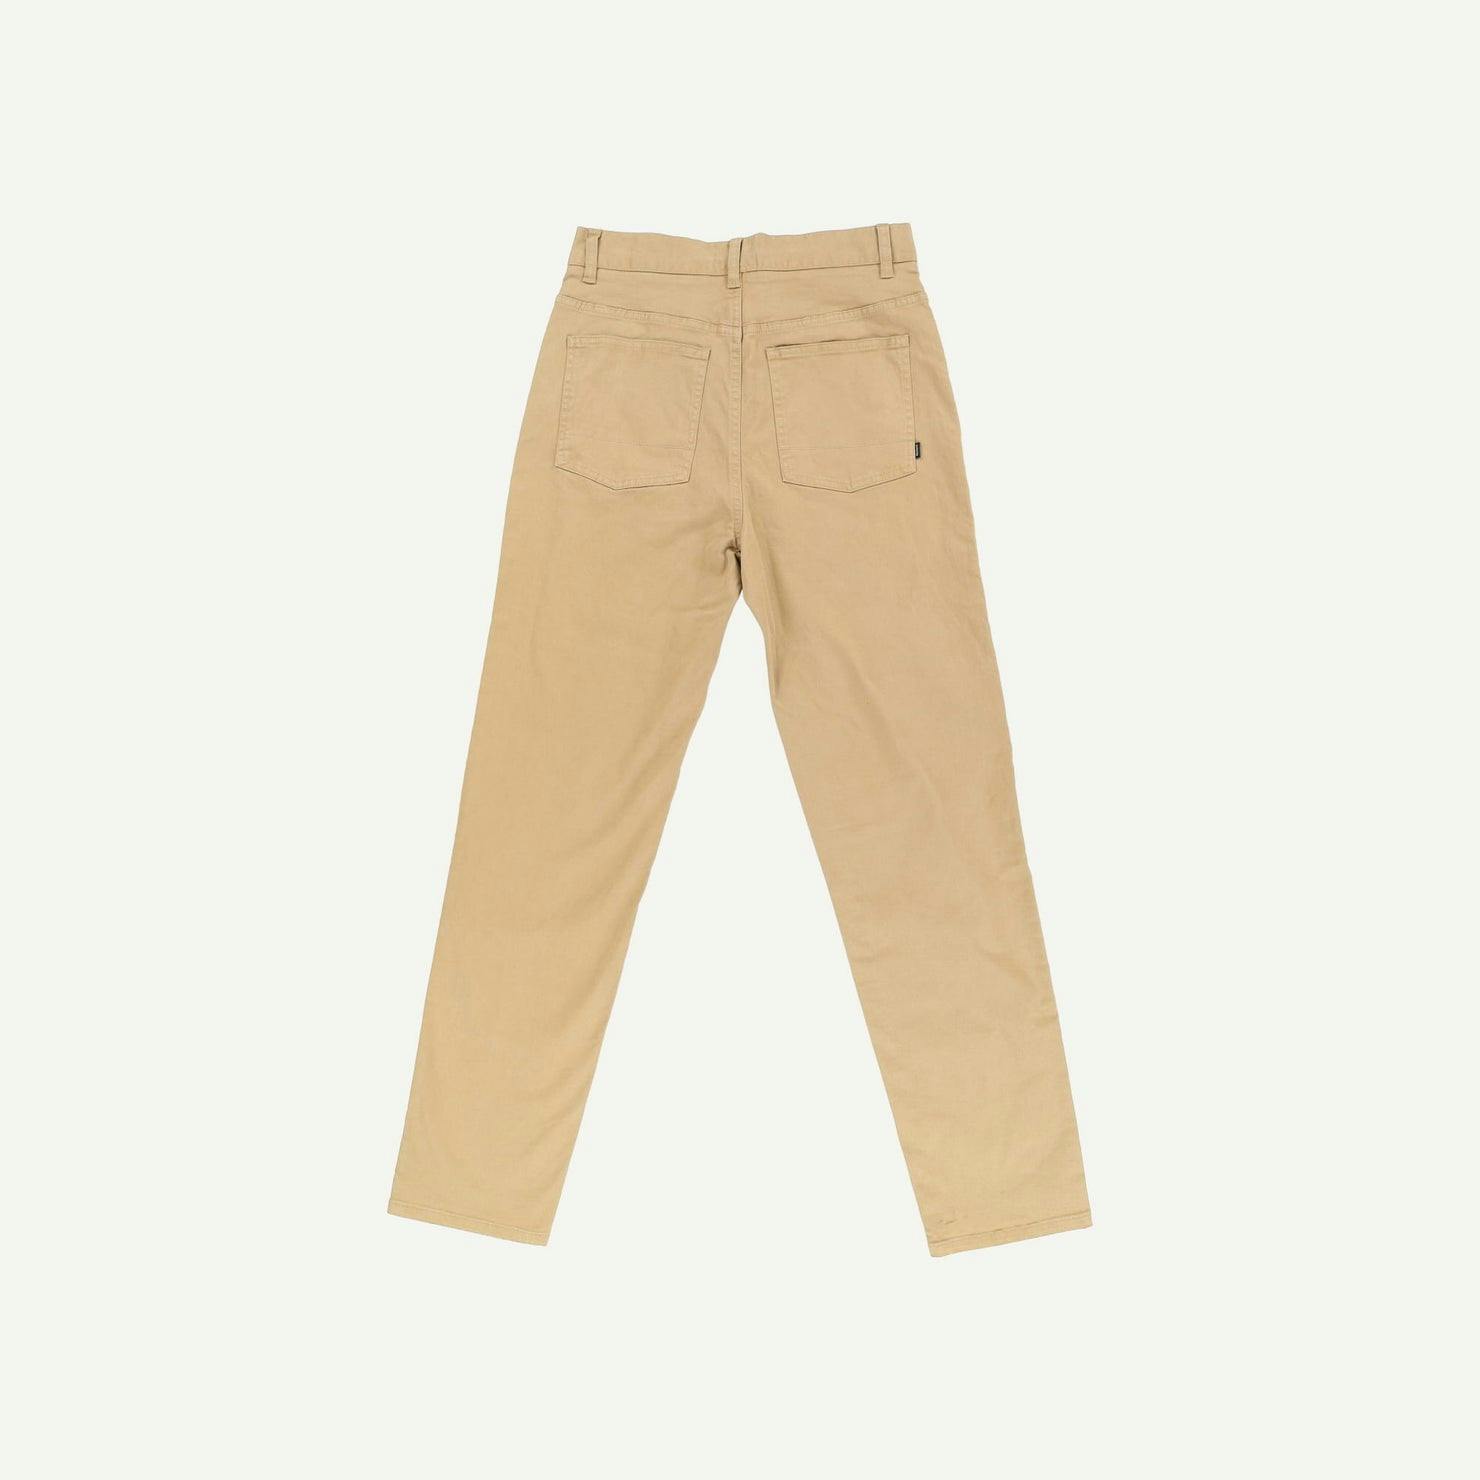 Finisterre As new Brown Trousers